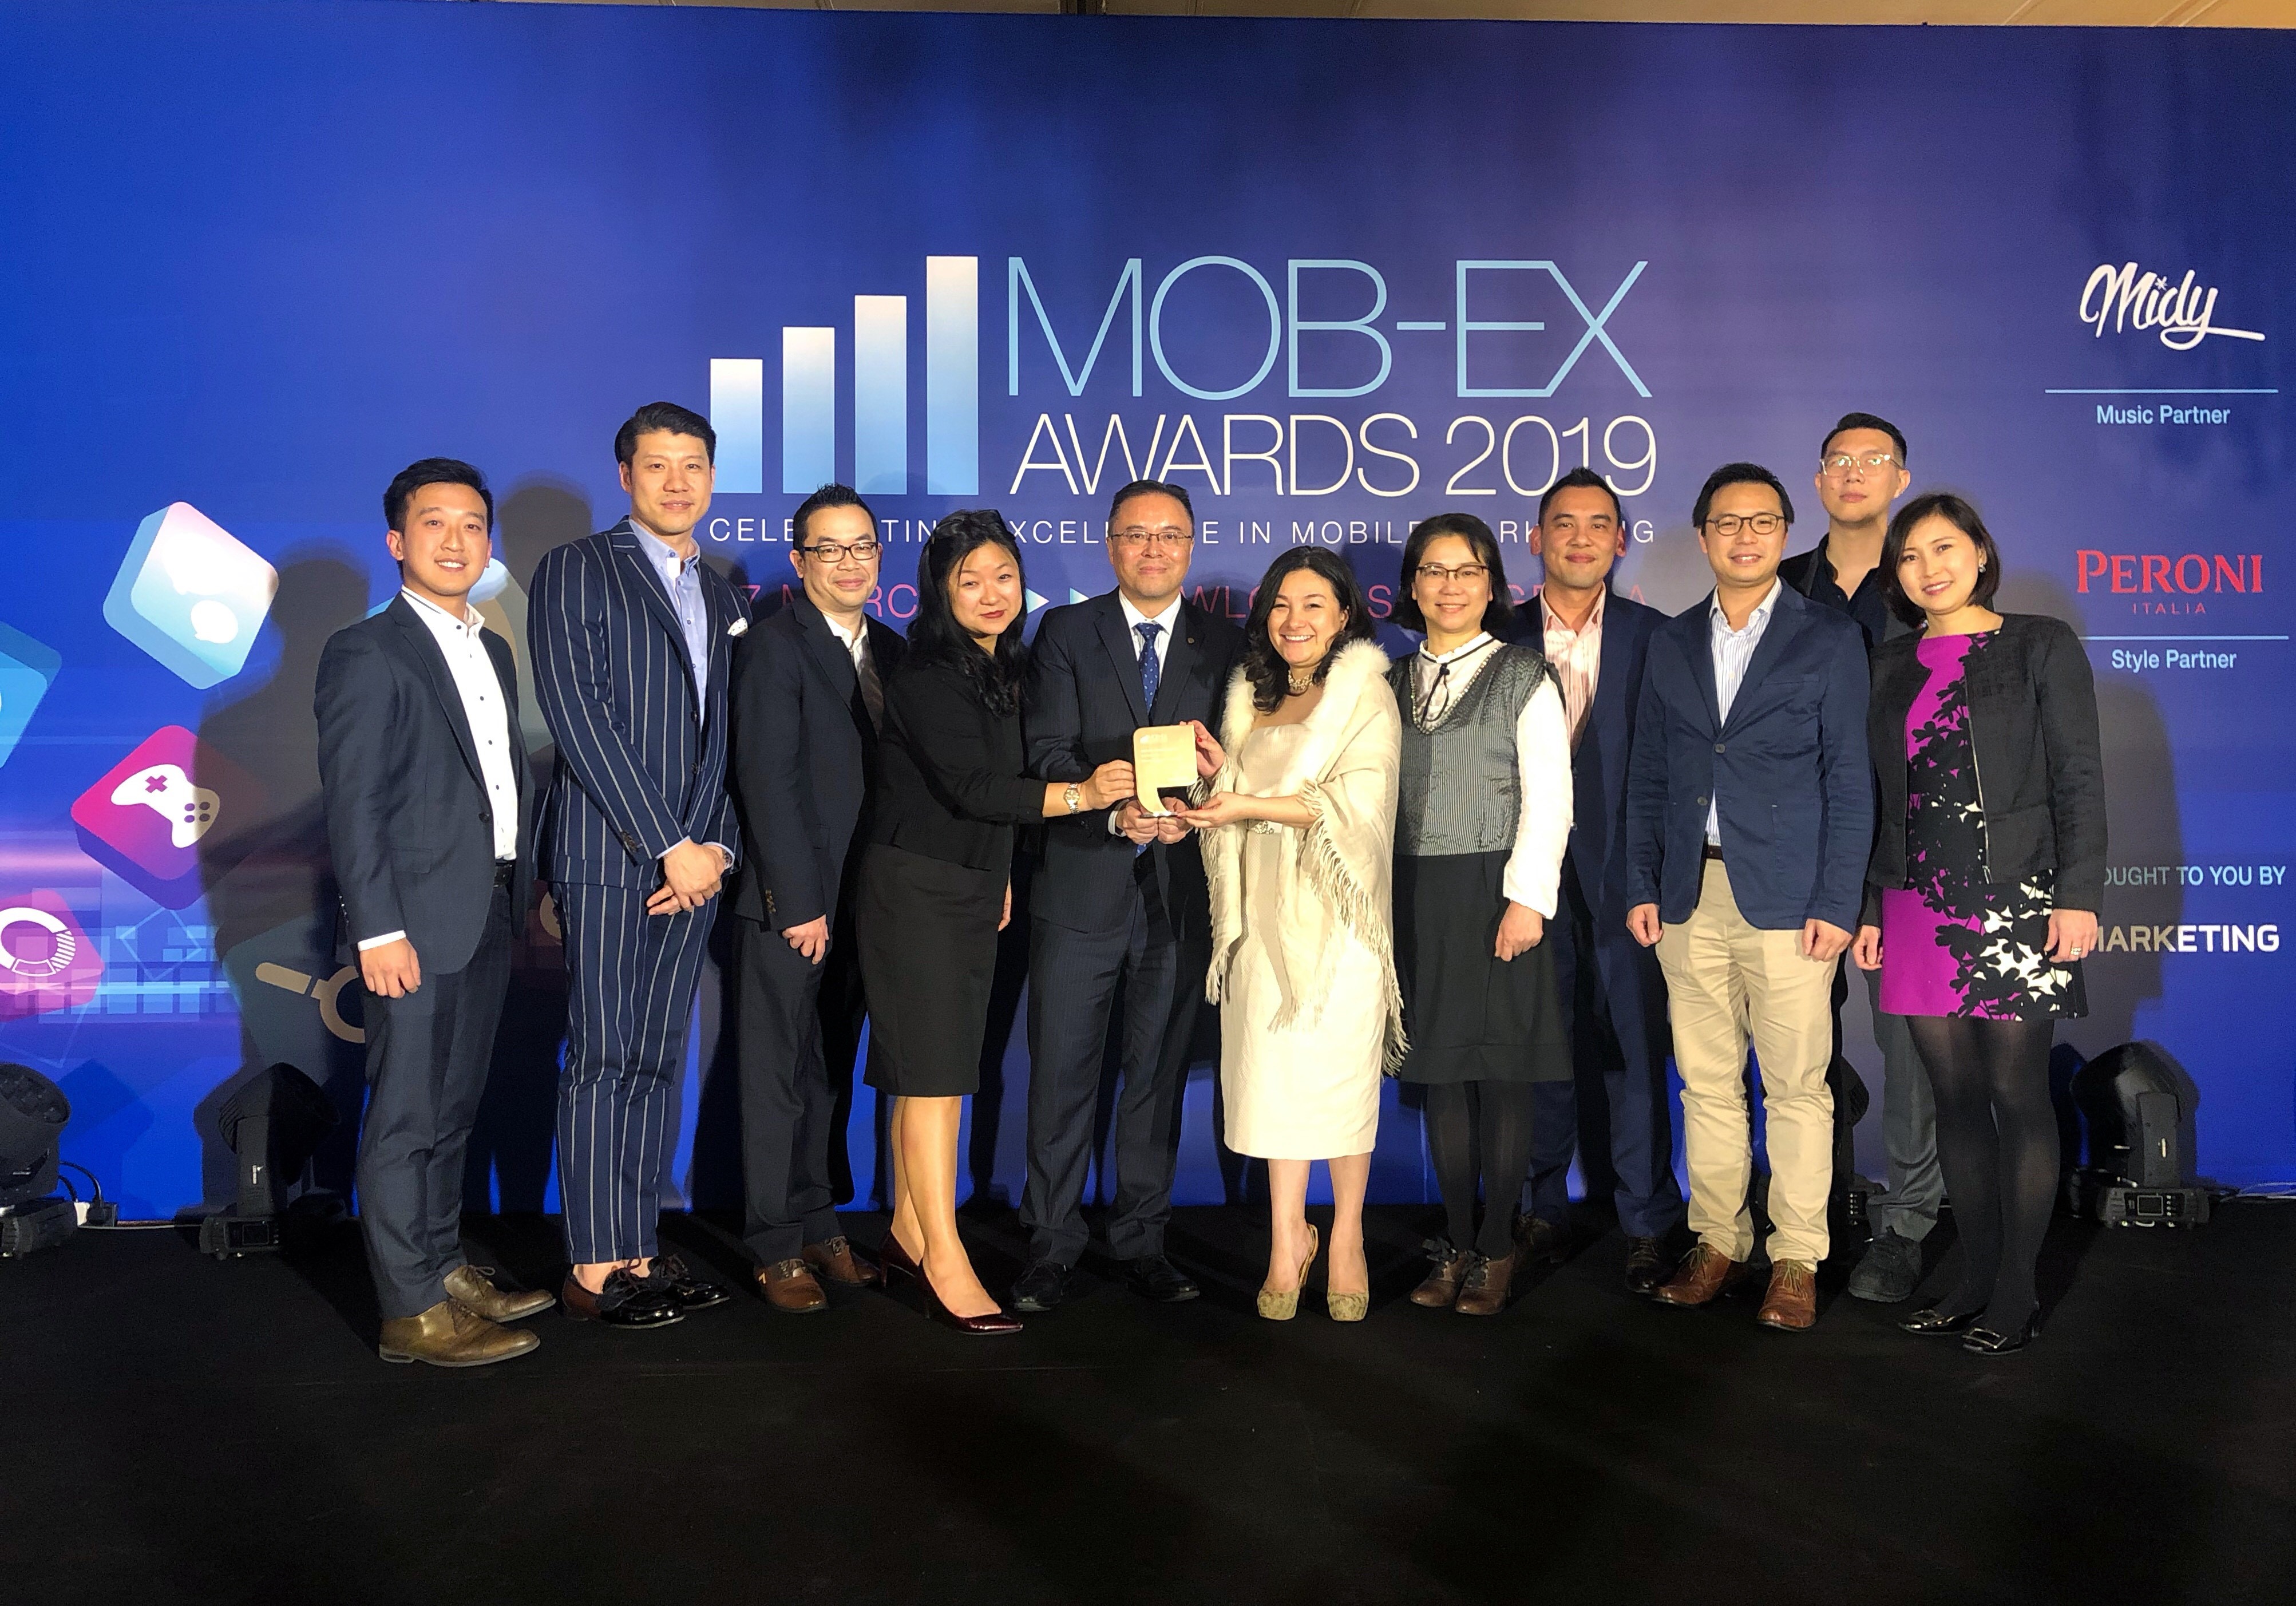 Greg Kwan, Chief Financial Officer, Sun Life Hong Kong (fifth from the left), Janey Leung, Chief Client Officer, Sun Life Hong Kong (fourth from the left) and the team at the Mob-Ex Awards 2019.